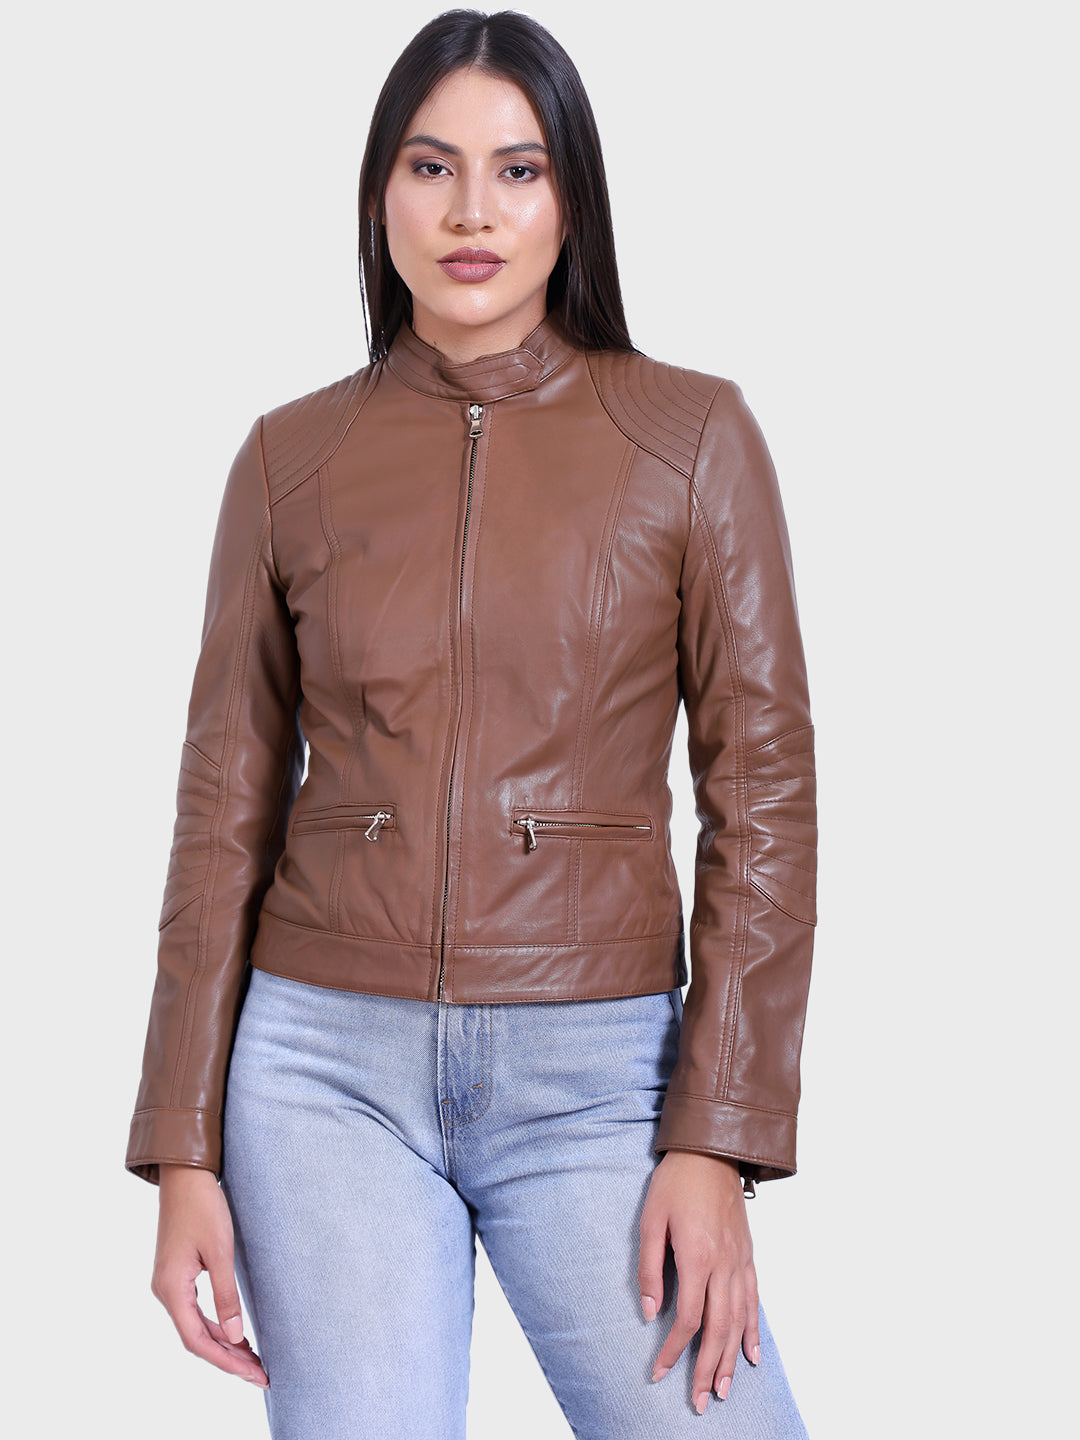 Justanned Hickory Natural Leather Jacket